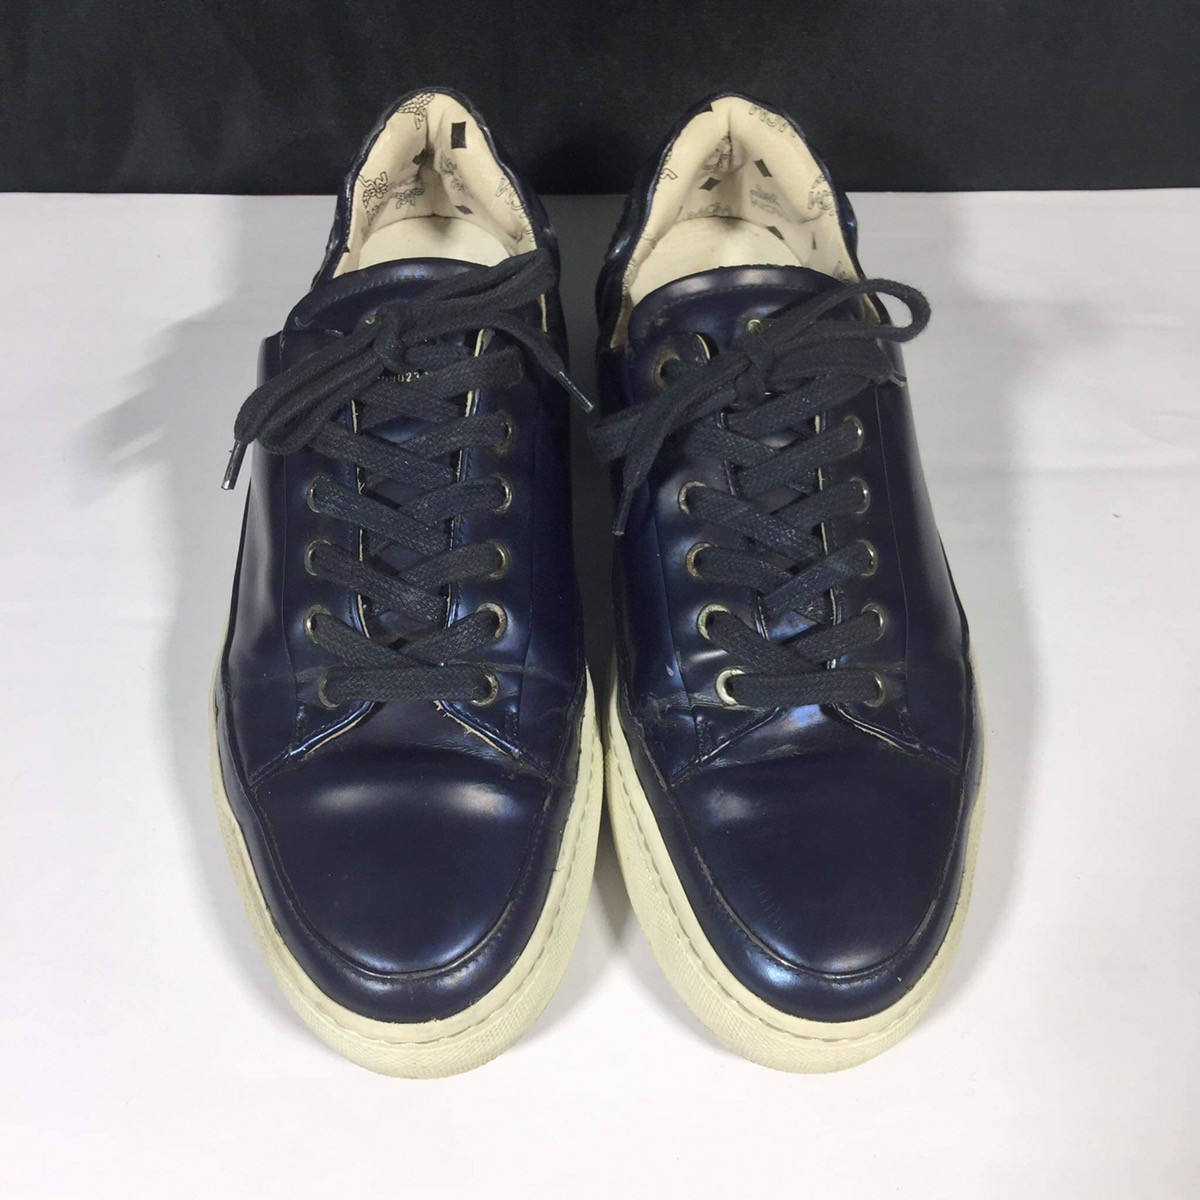 Patent Leather Sneaker Low - 4